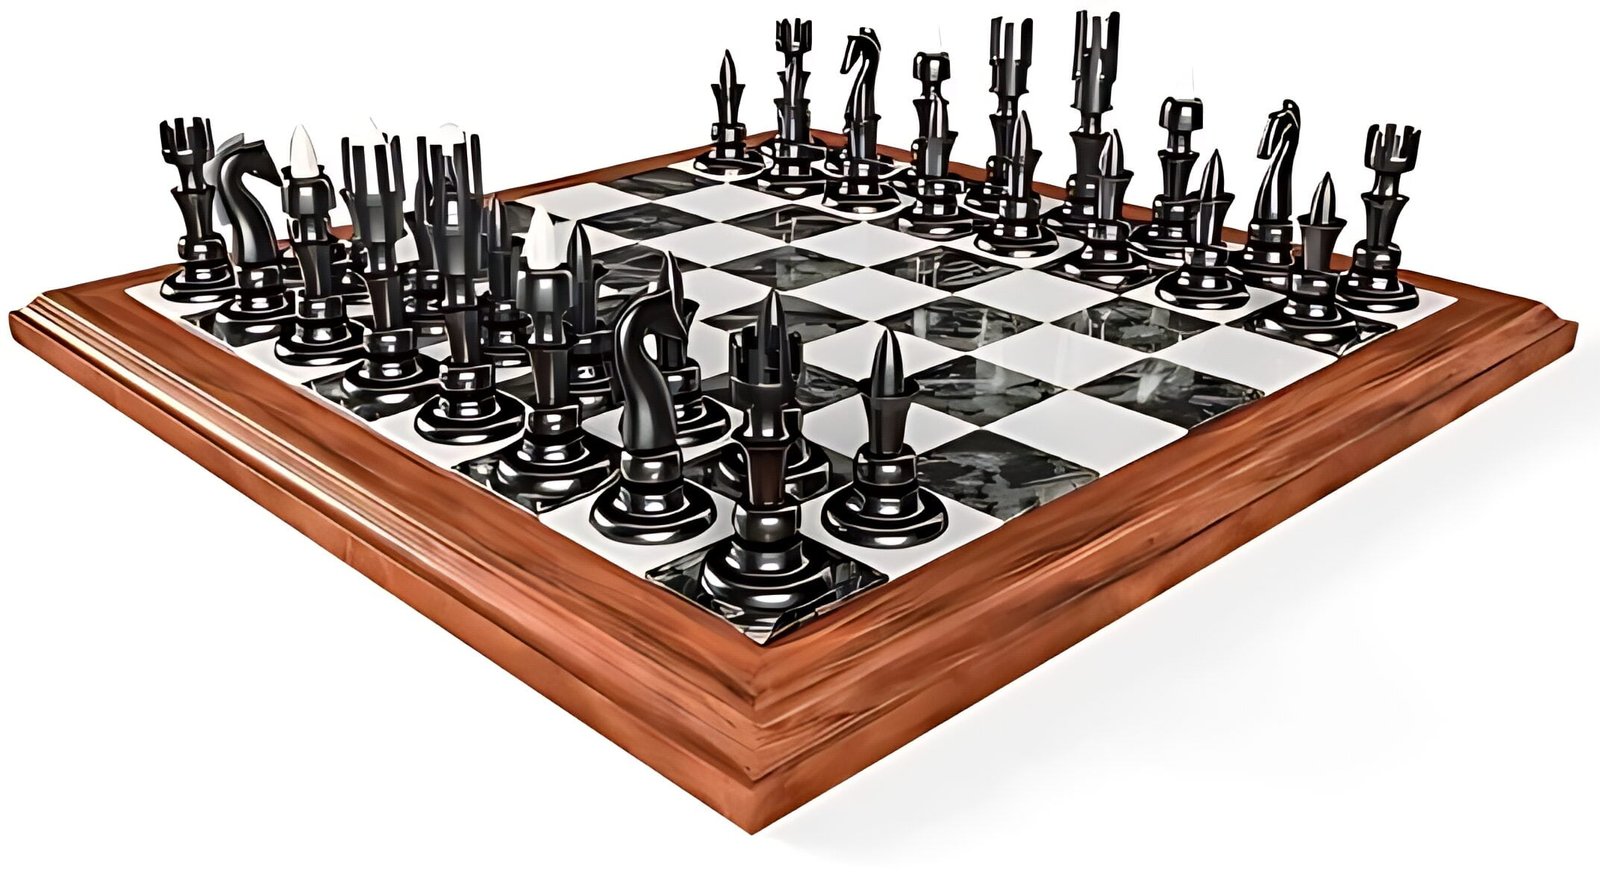 chess board with beveled wood edges and chess pieces that are black metal and silver metal